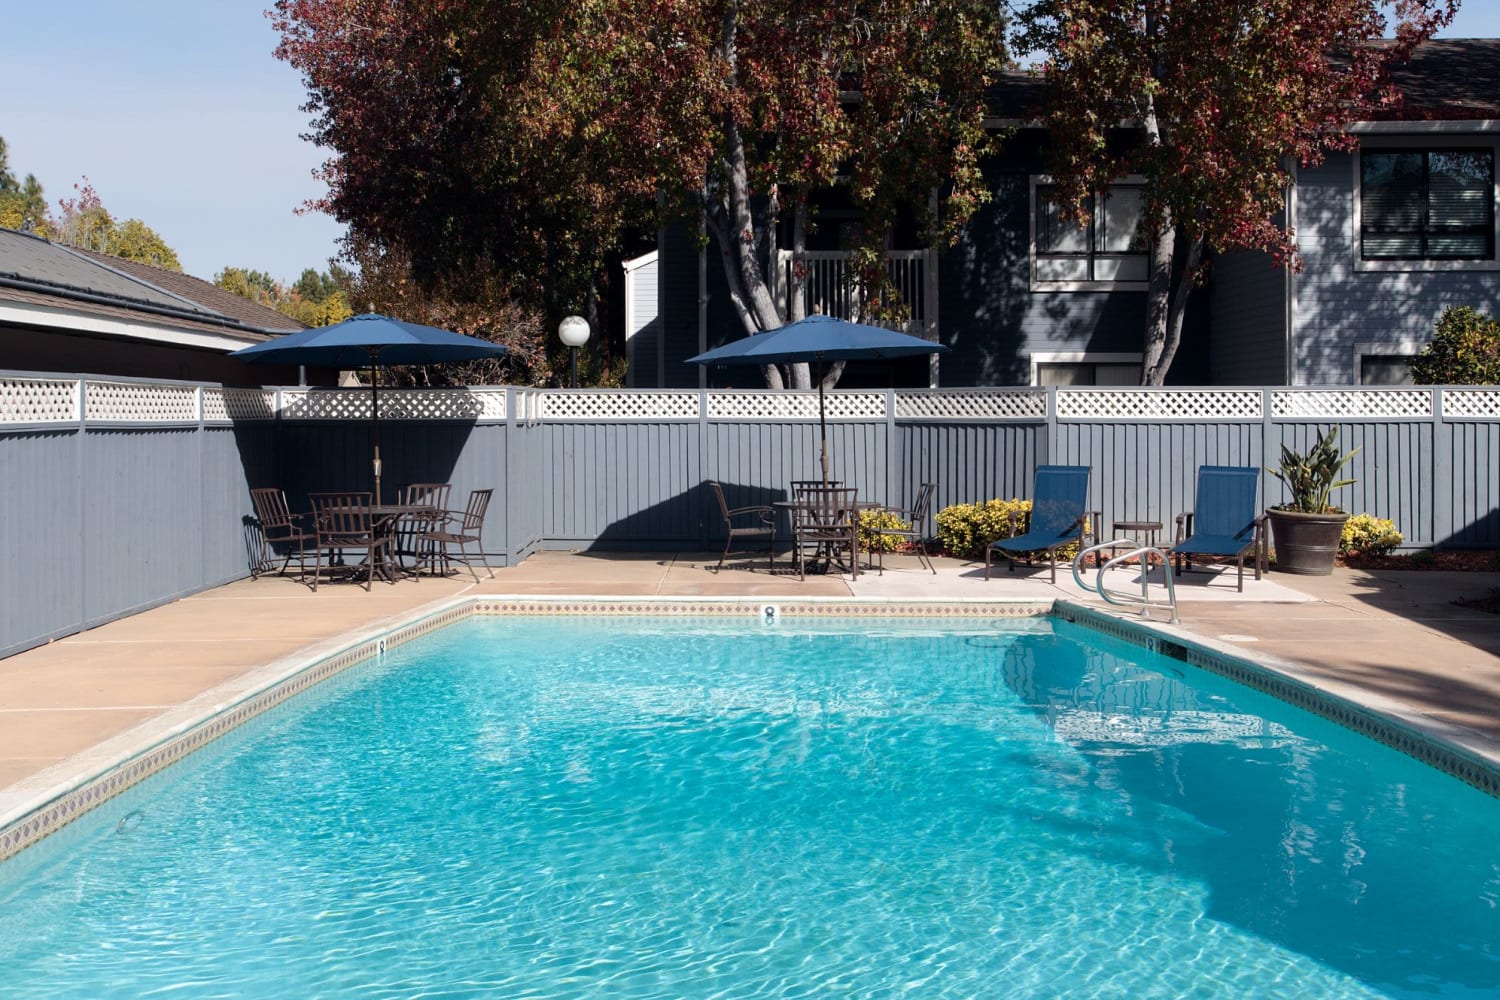 Crystal clear pool at Amber Court in Fremont, California